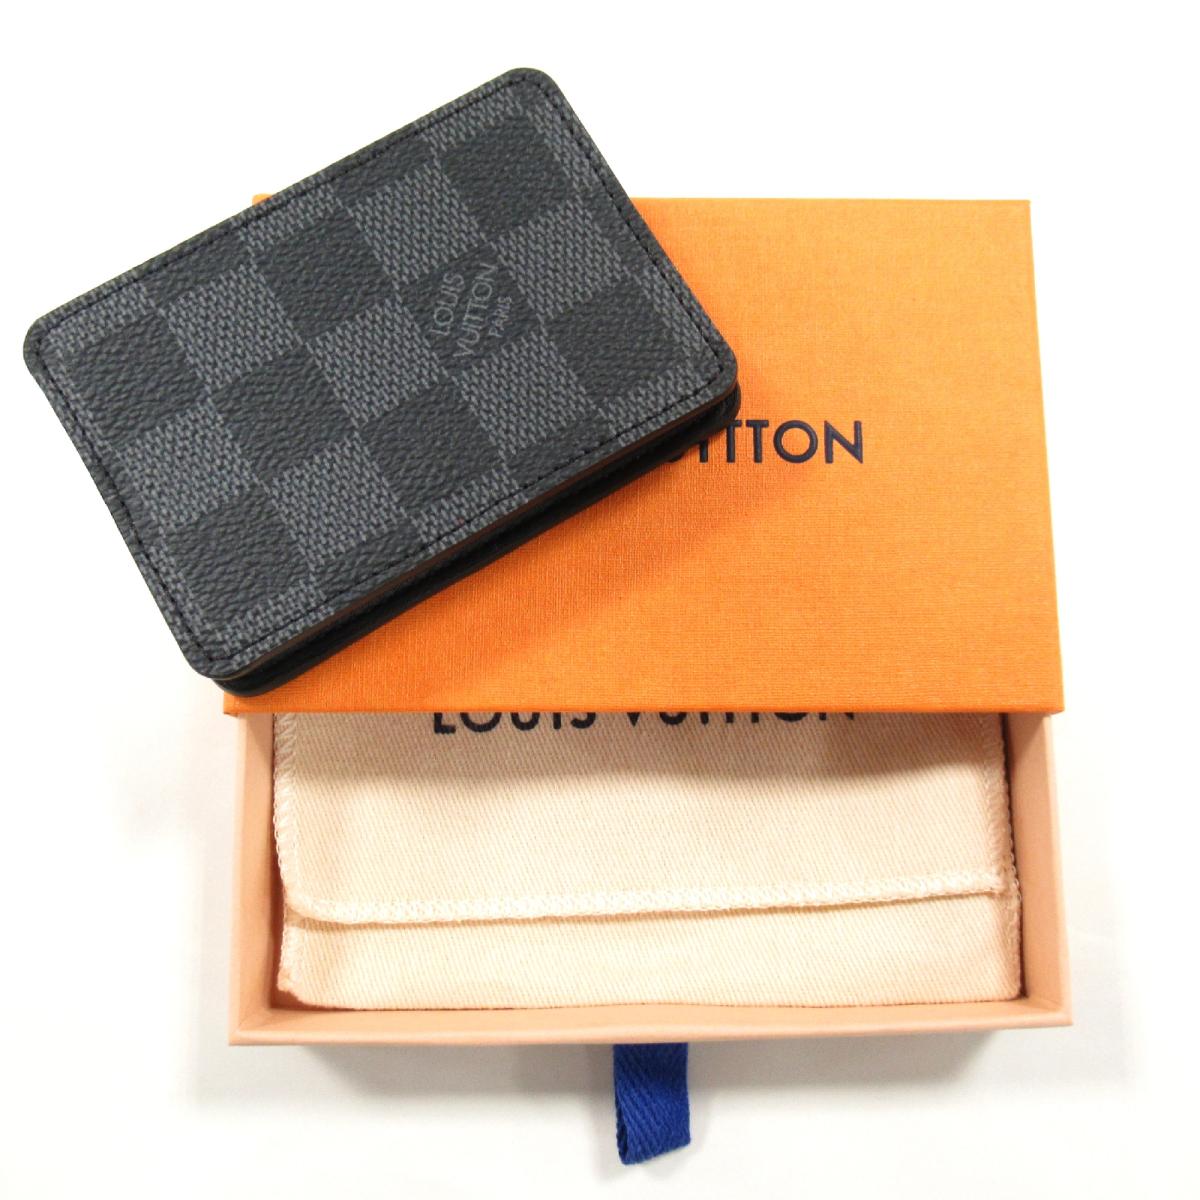 LOUIS VUITTON ルイヴィトン ダミエグラフィット コインパース コイン ...